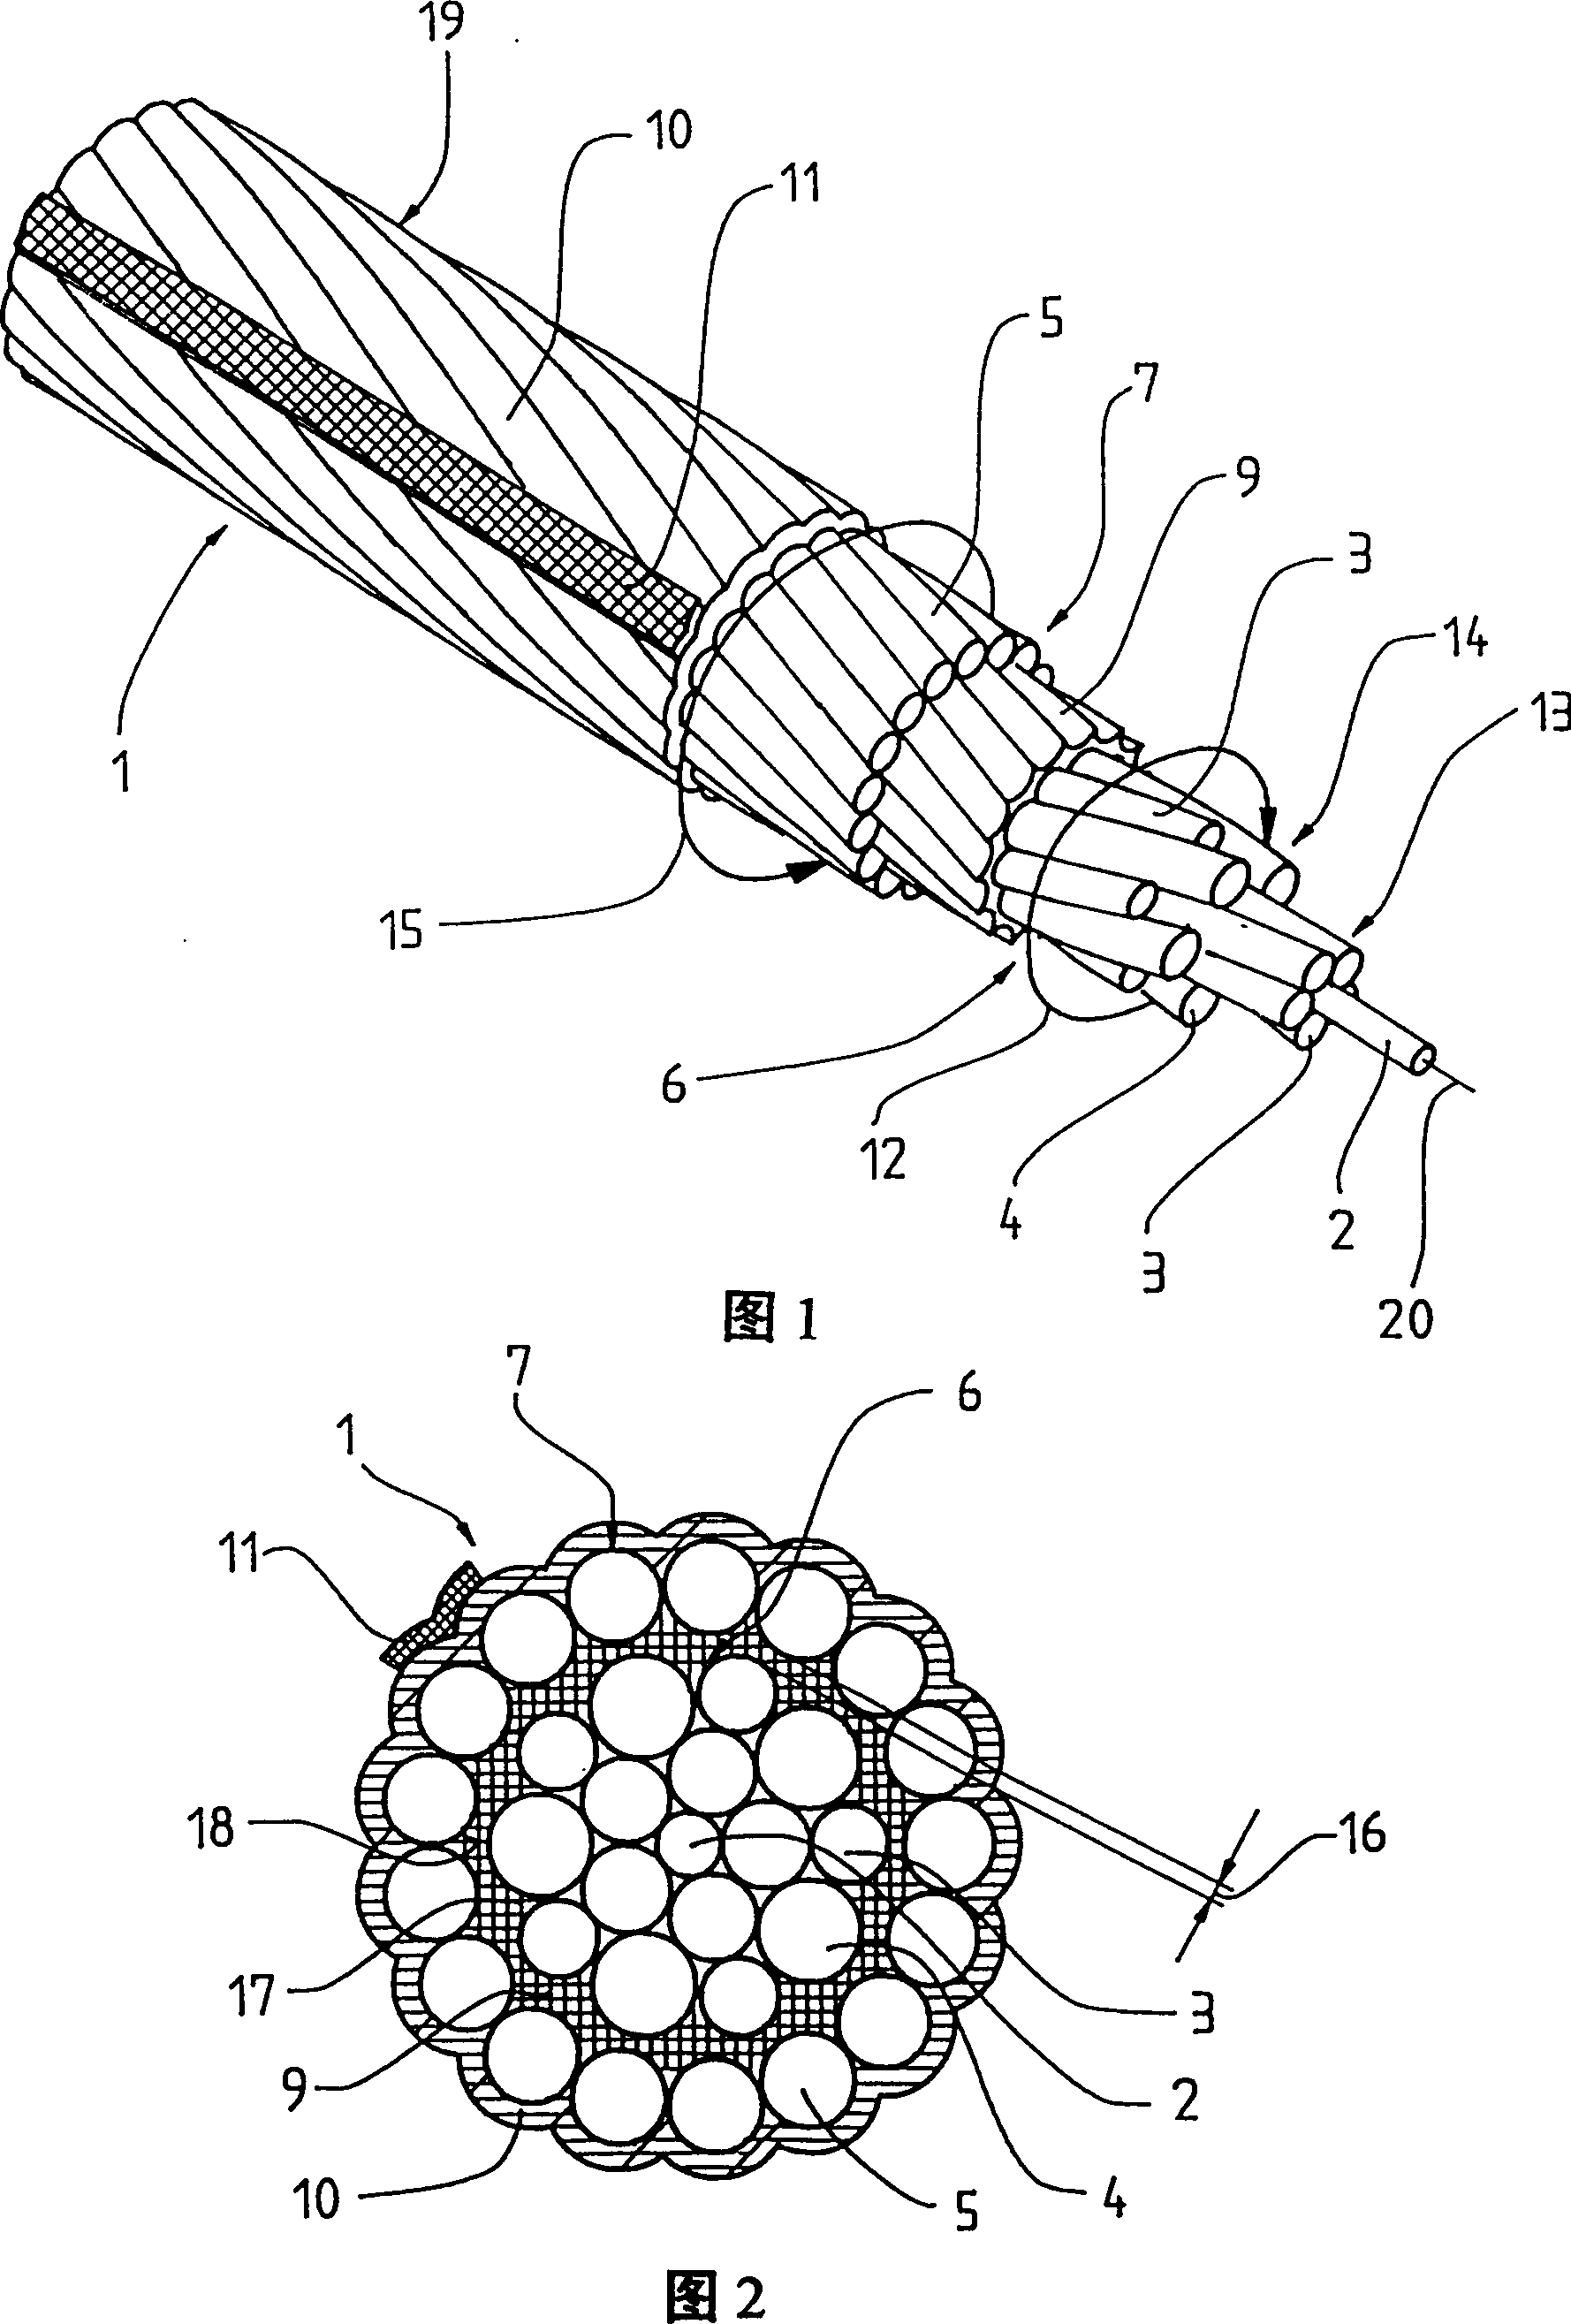 Device for detemining requiring or not to charge synthetic fibre rope